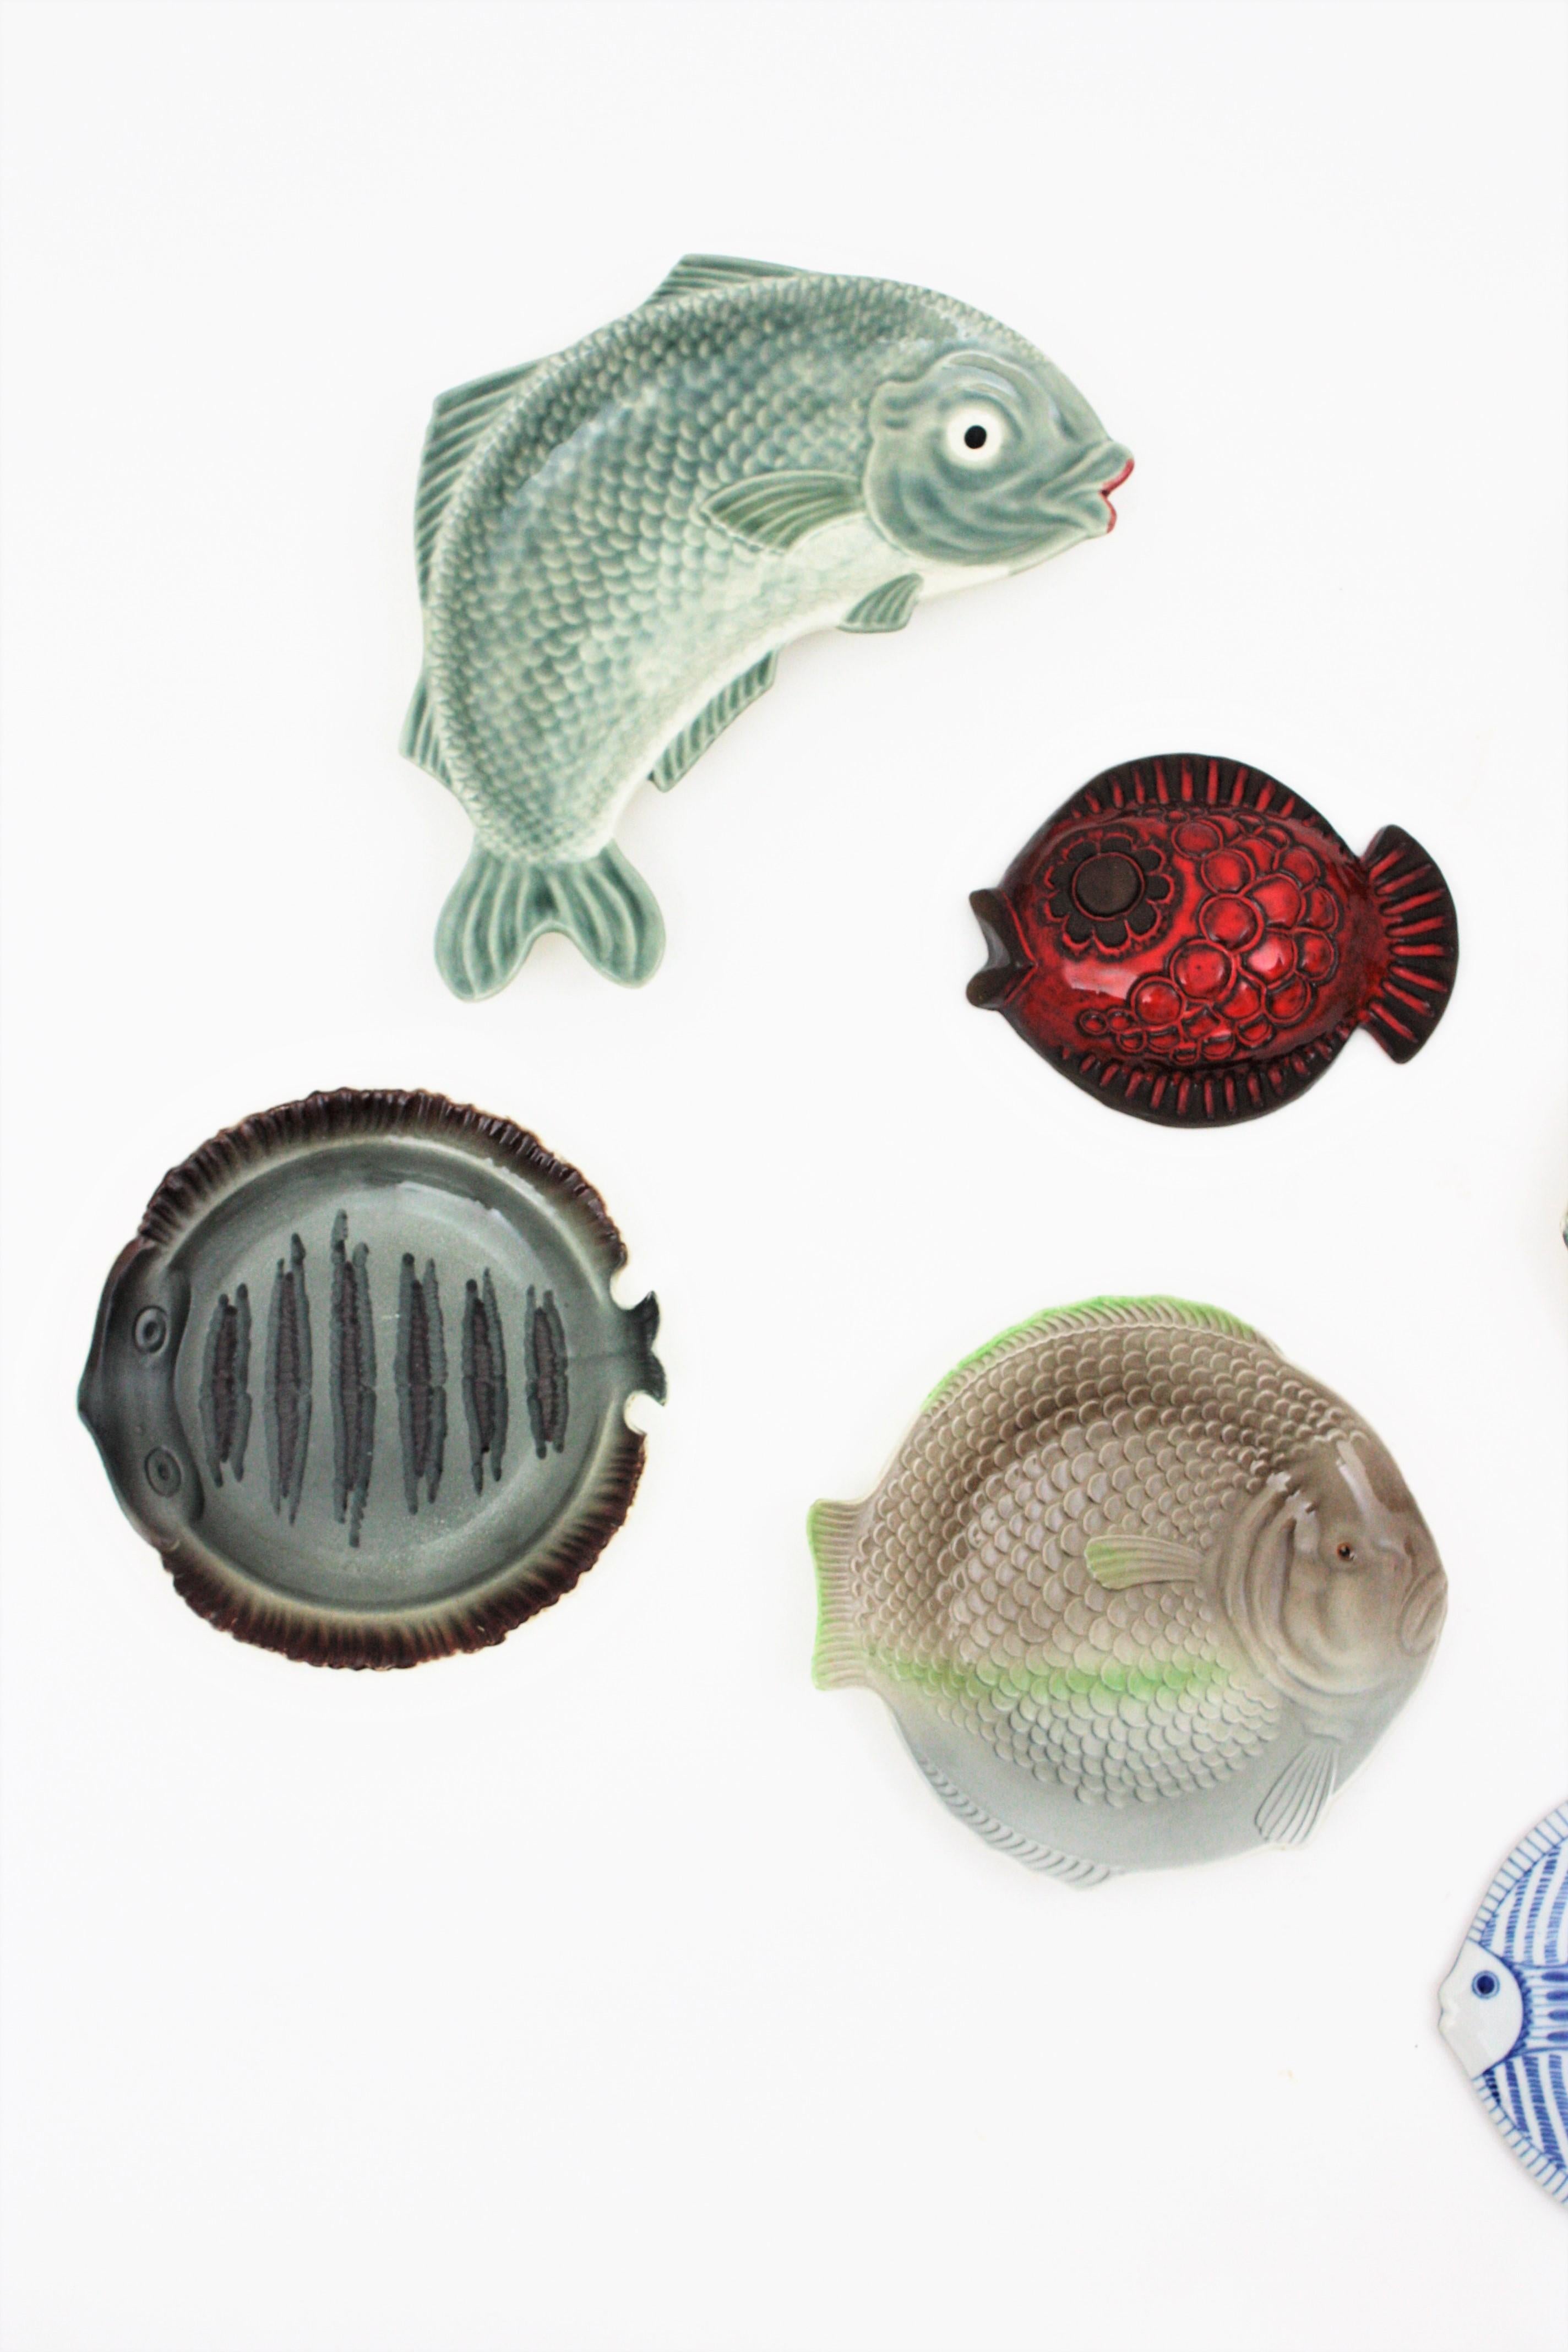 Set of Midcentury multi color fish Plates and Platters as Wall Decoration
A cool collection of nine european glazed ceramic, porcelain and terracotta fishes in different shapes and sizes.
They come from France, Portugal, England, Sweden and Spain